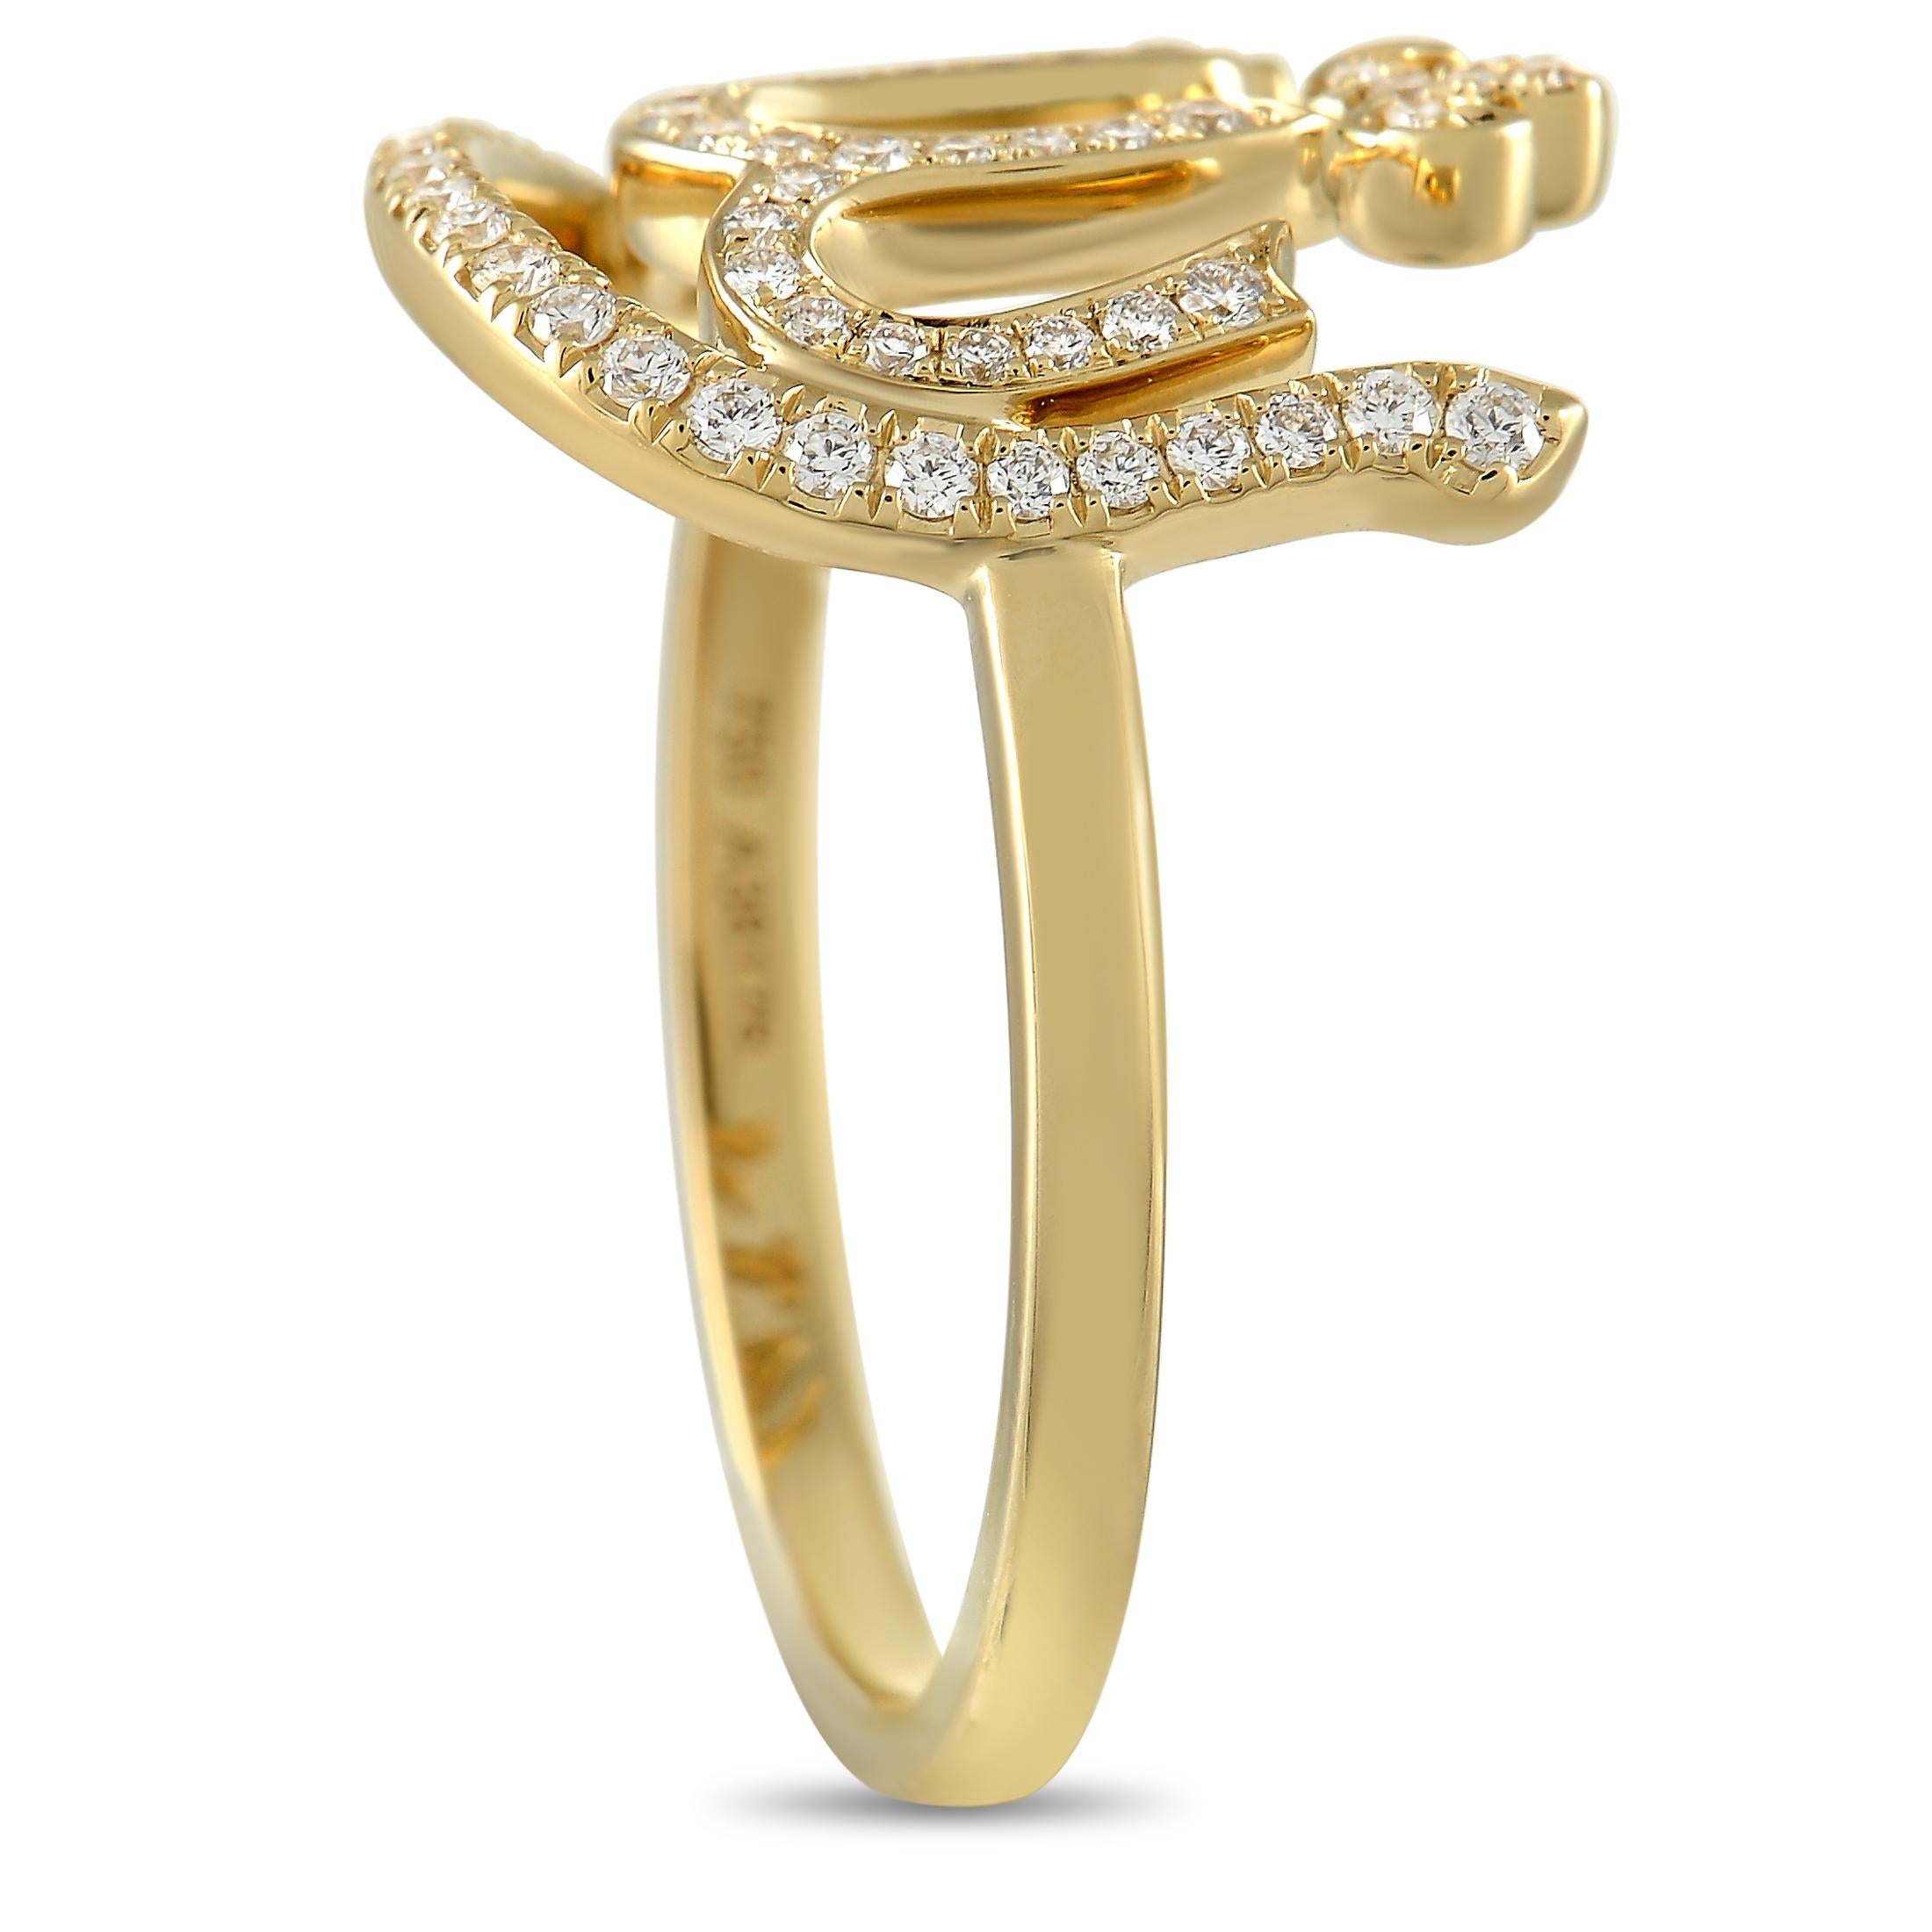 This Messika Faith Allah 18K Yellow Gold 0.24 ct Diamond Ring is made with 18K Yellow Gold, and set with 0.24 carats of beautiful small round-cut diamonds. The ring has a band thickness of 2 mm, a top height of 4 mm, and top dimensions of 20 by 15